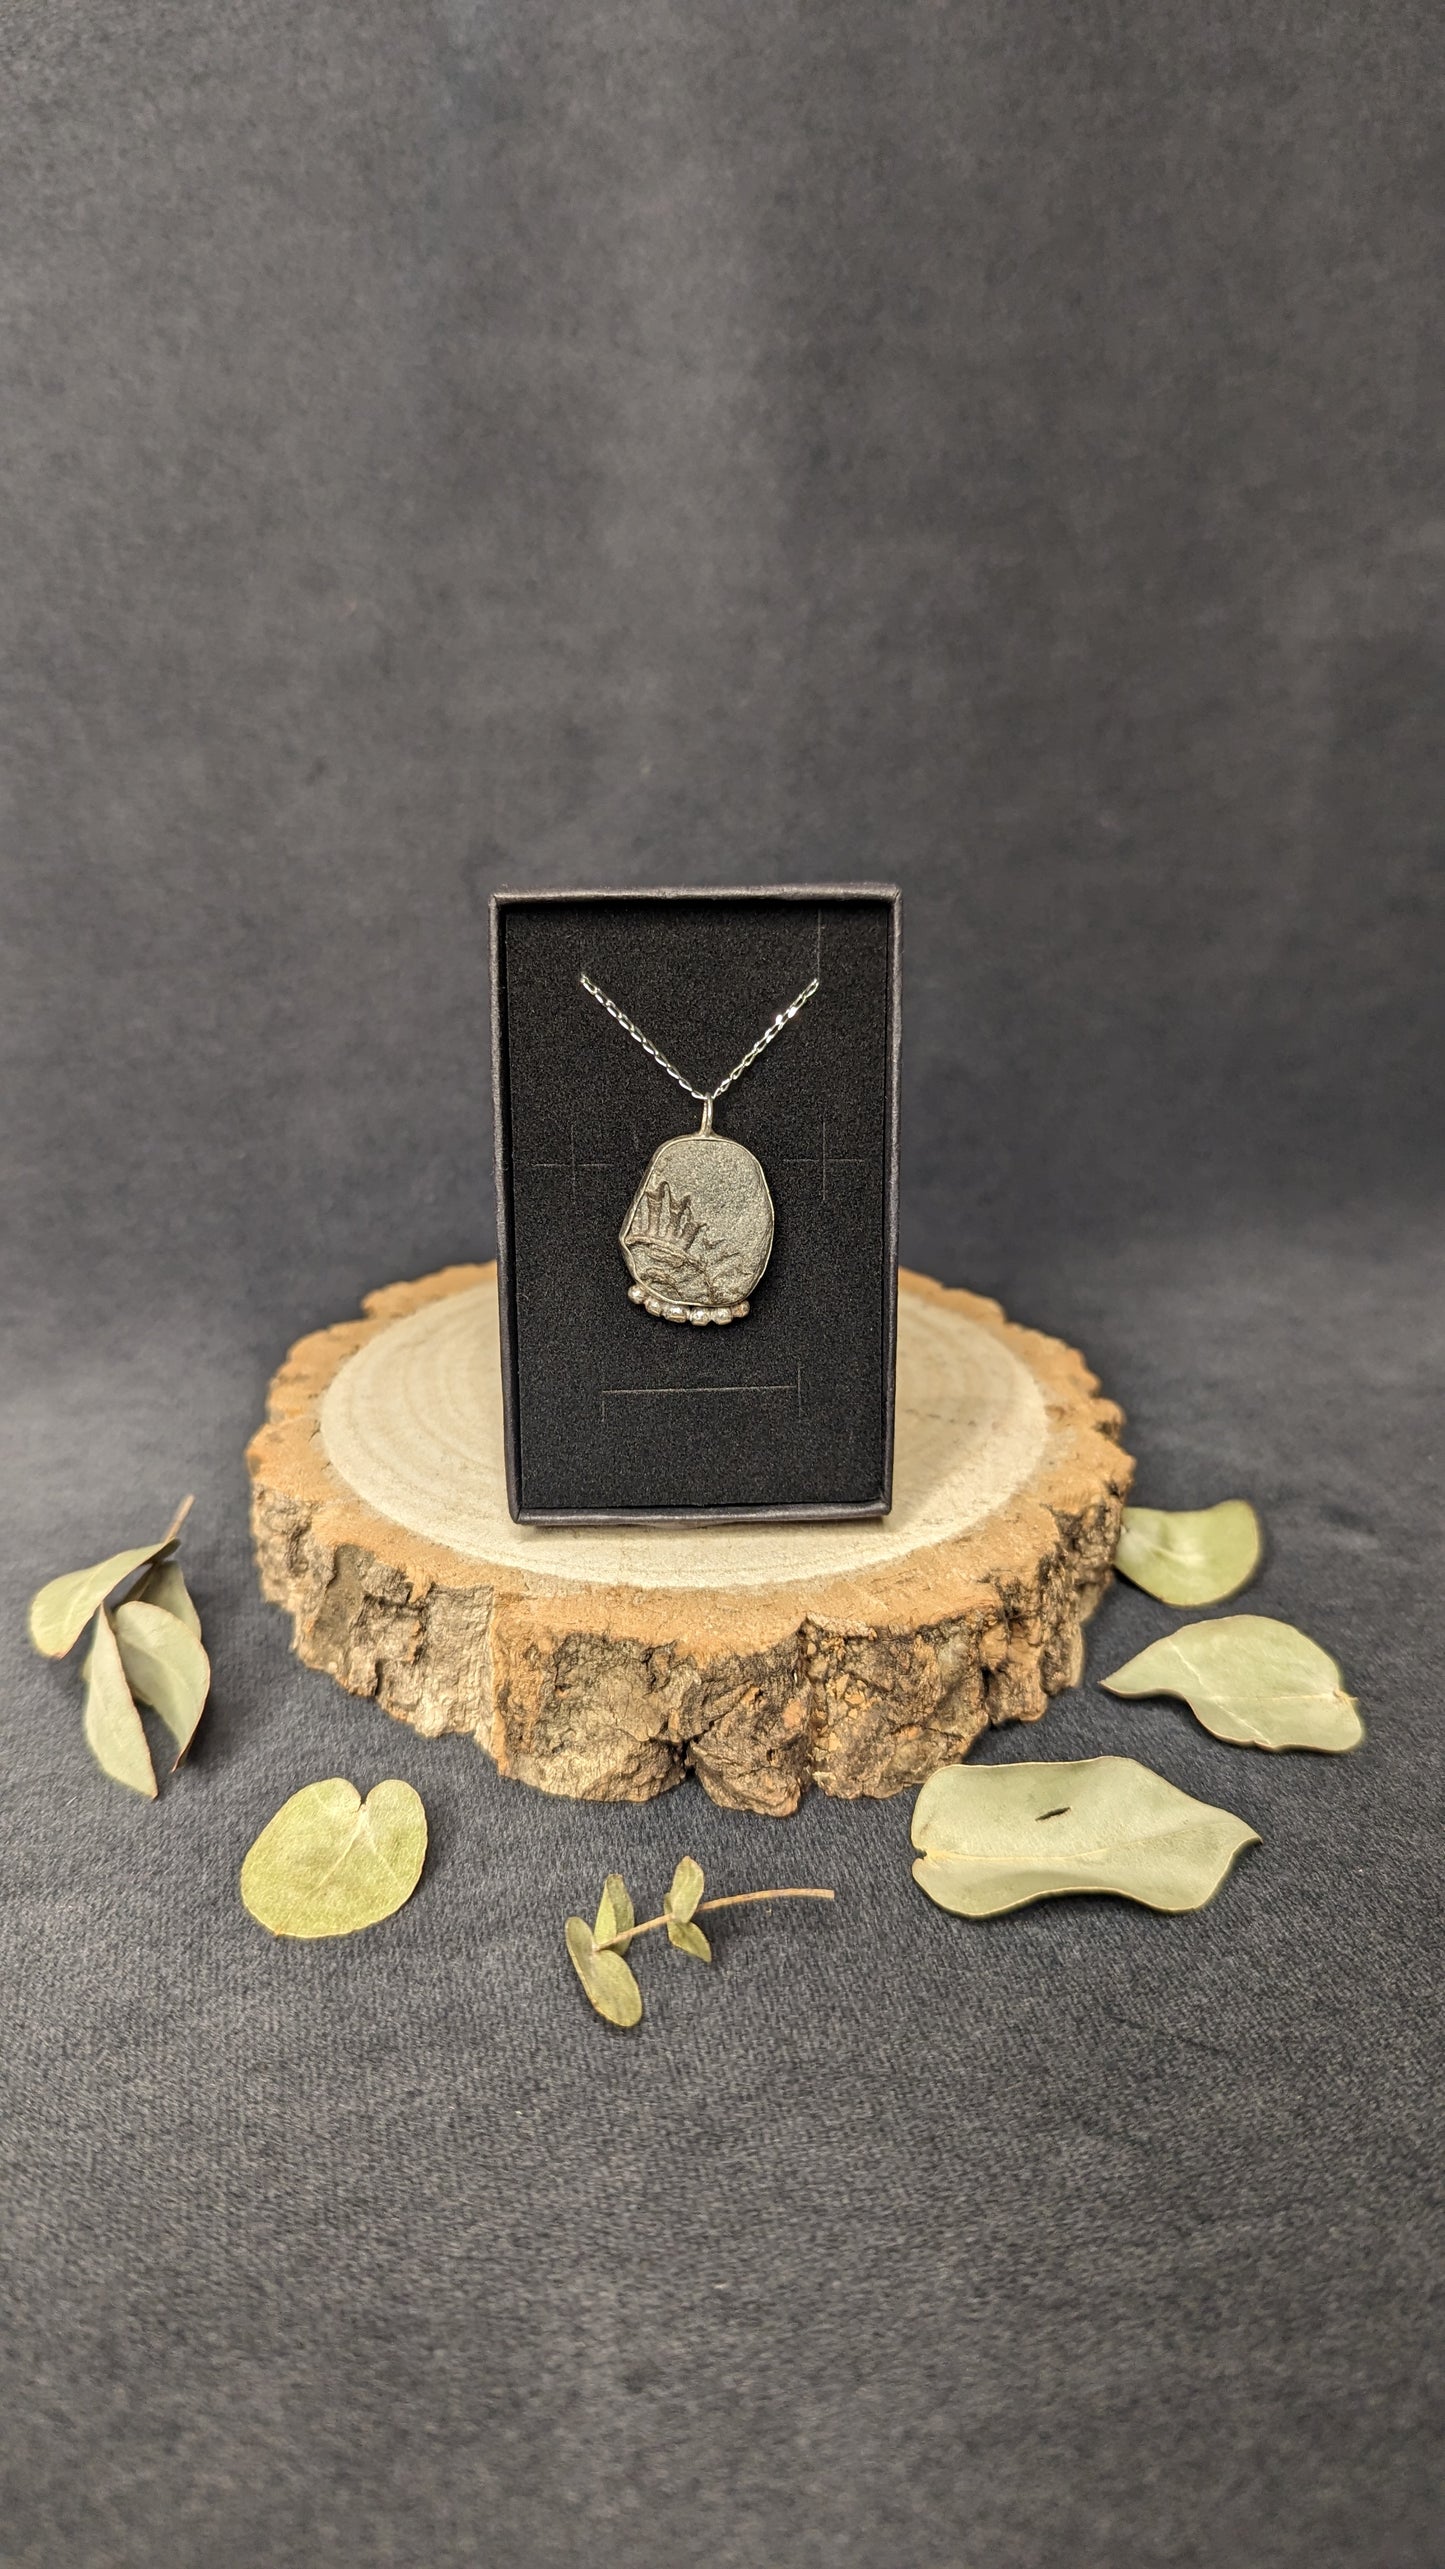 Ammonite Fossil Necklace by Dust Designs